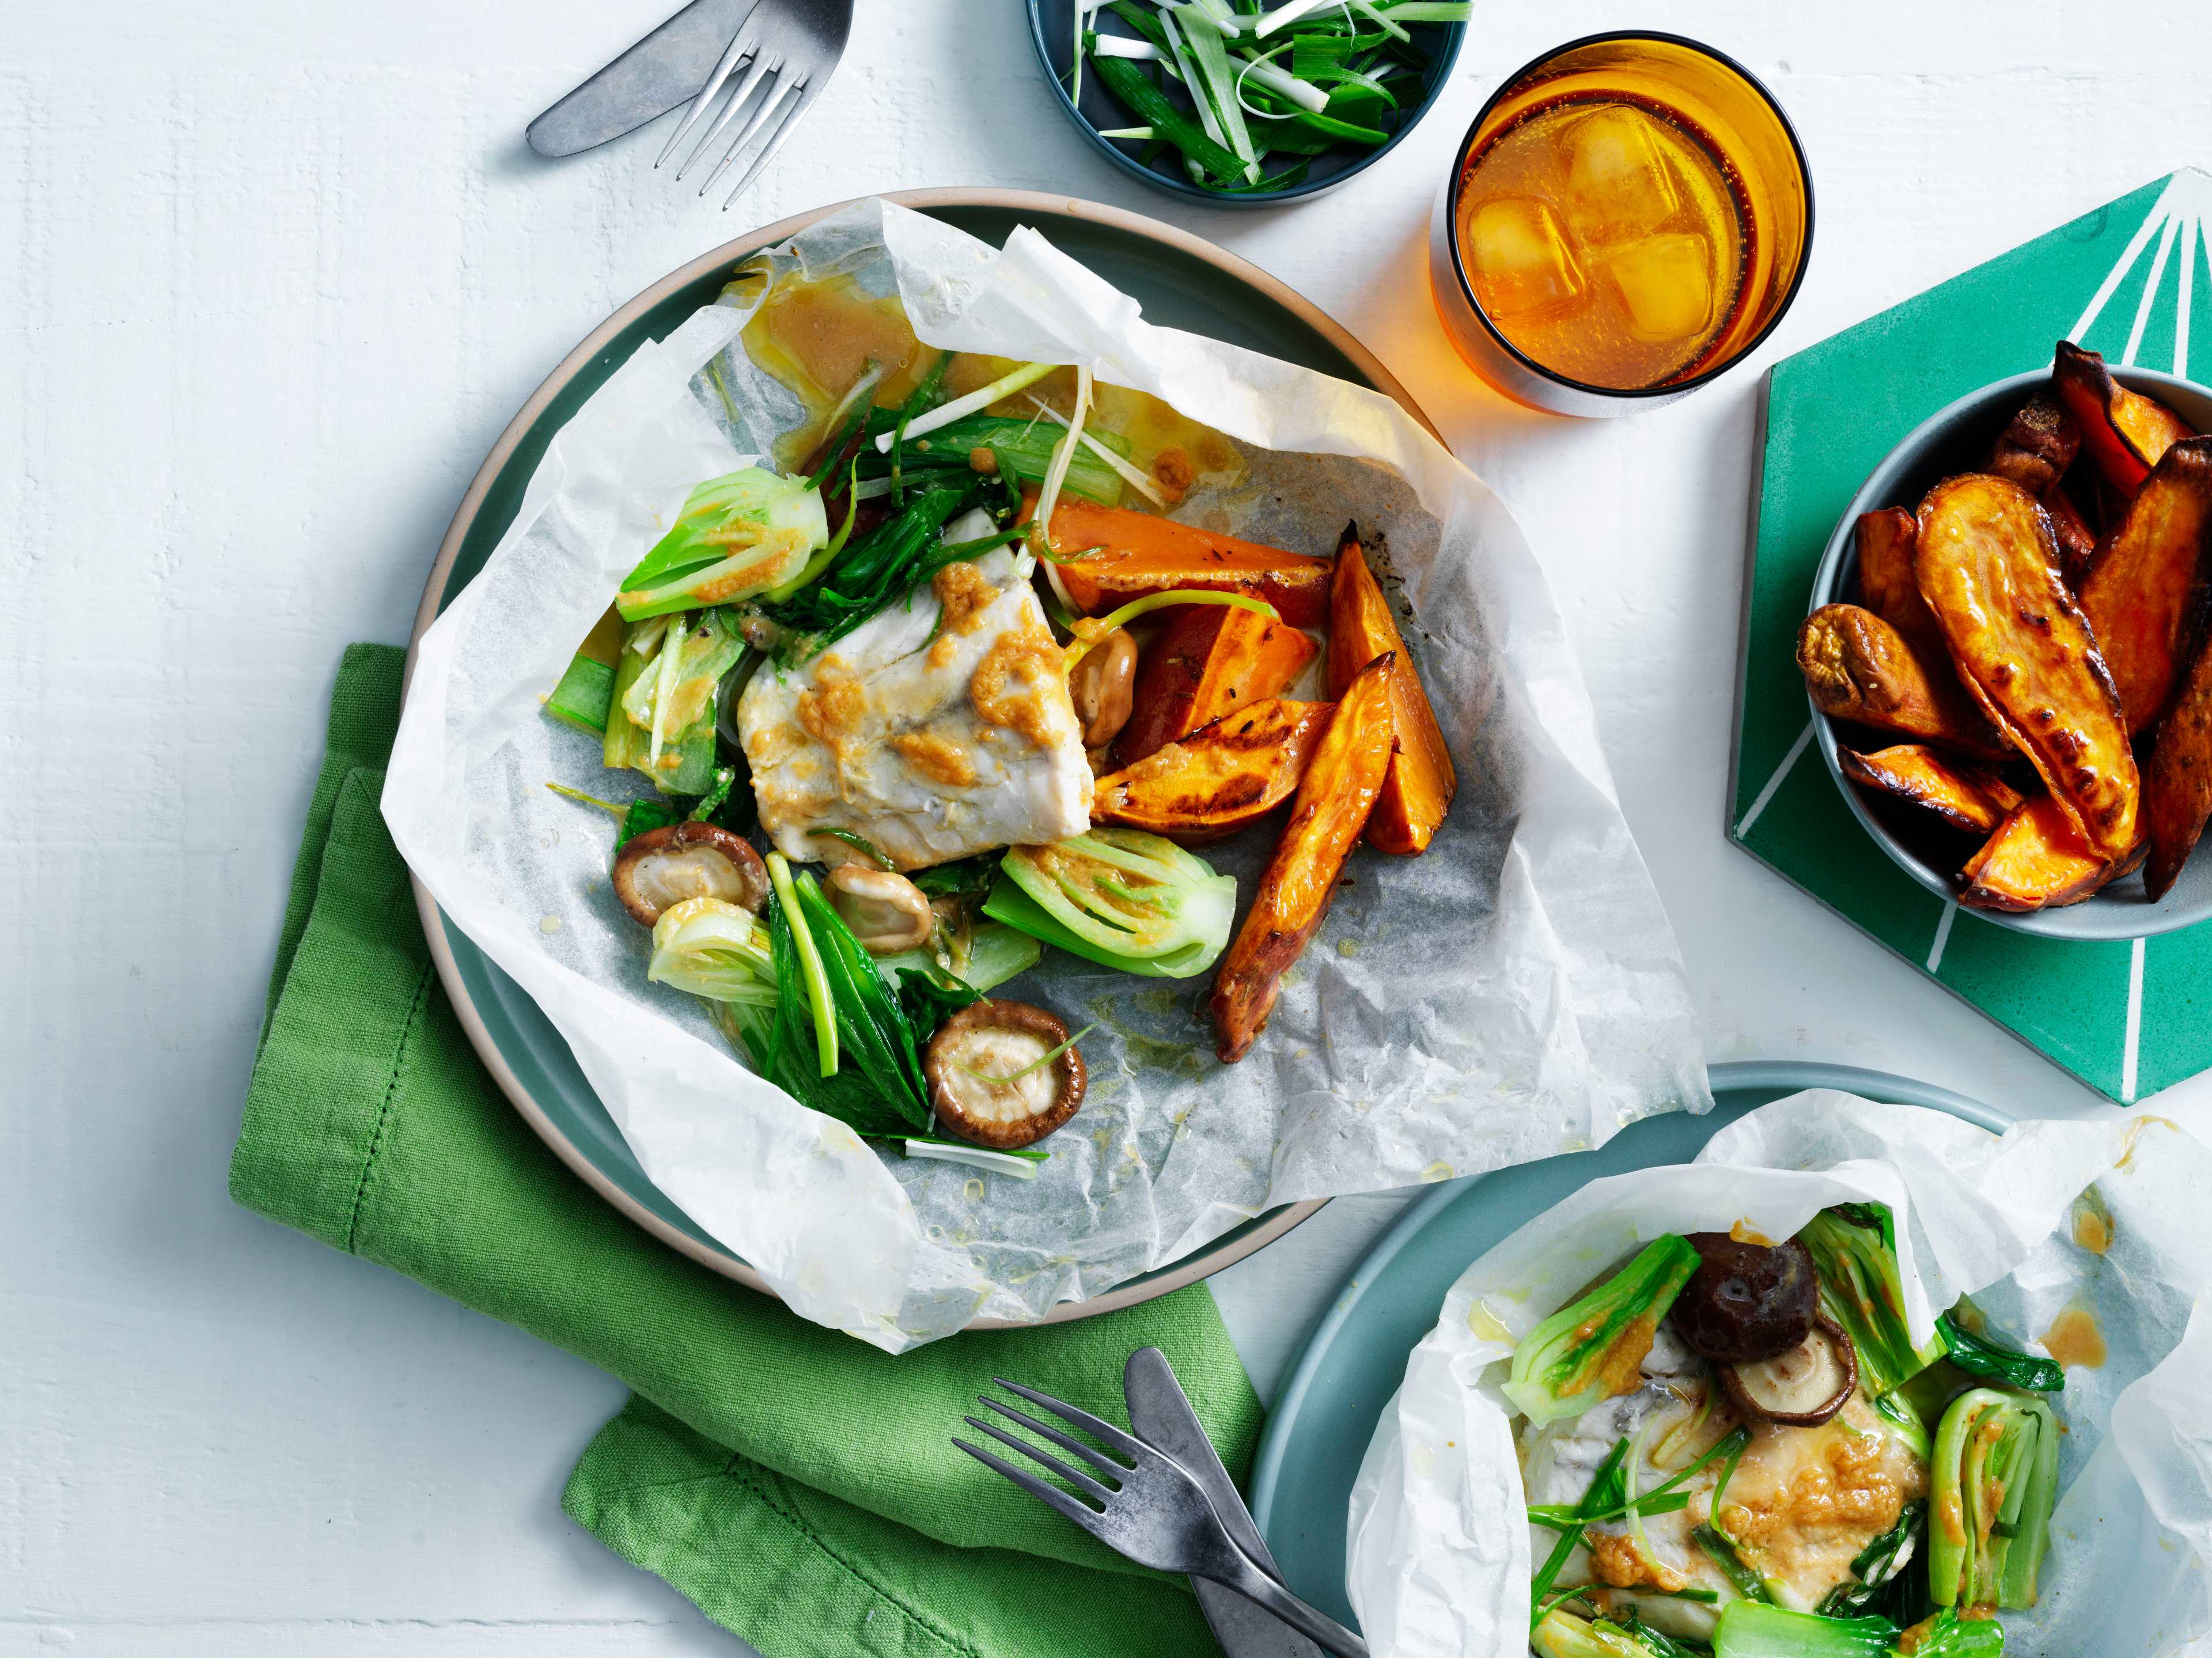 Paper Bag-Steamed Miso Butter Fish with Sweet Potato Wedges